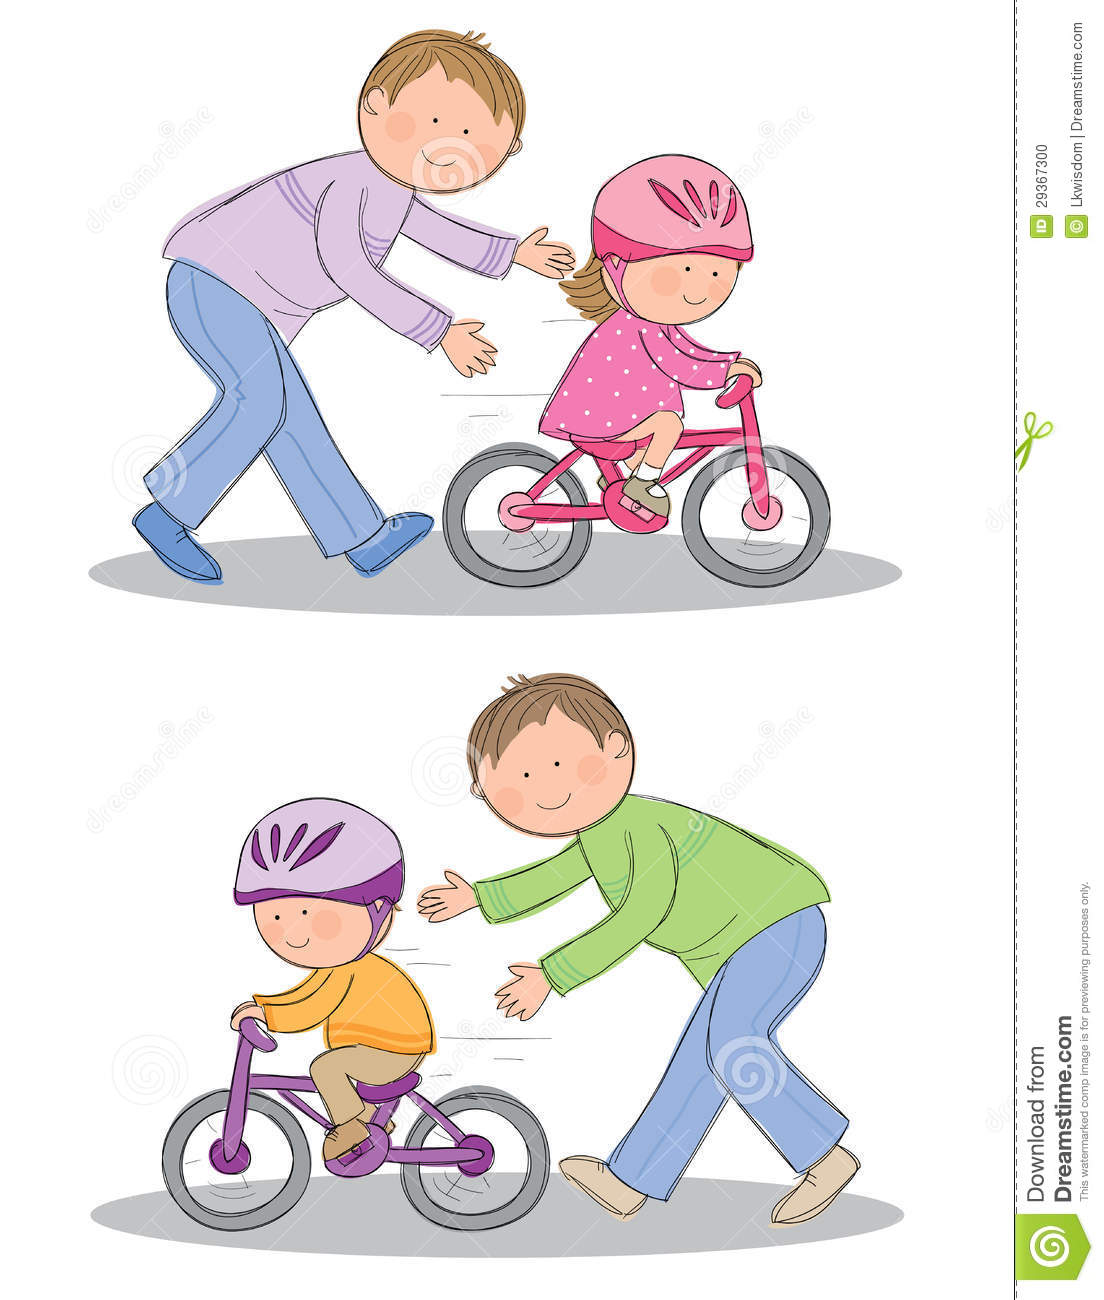 Learning To Ride A Bike Clipart Learning To Ride A Bike